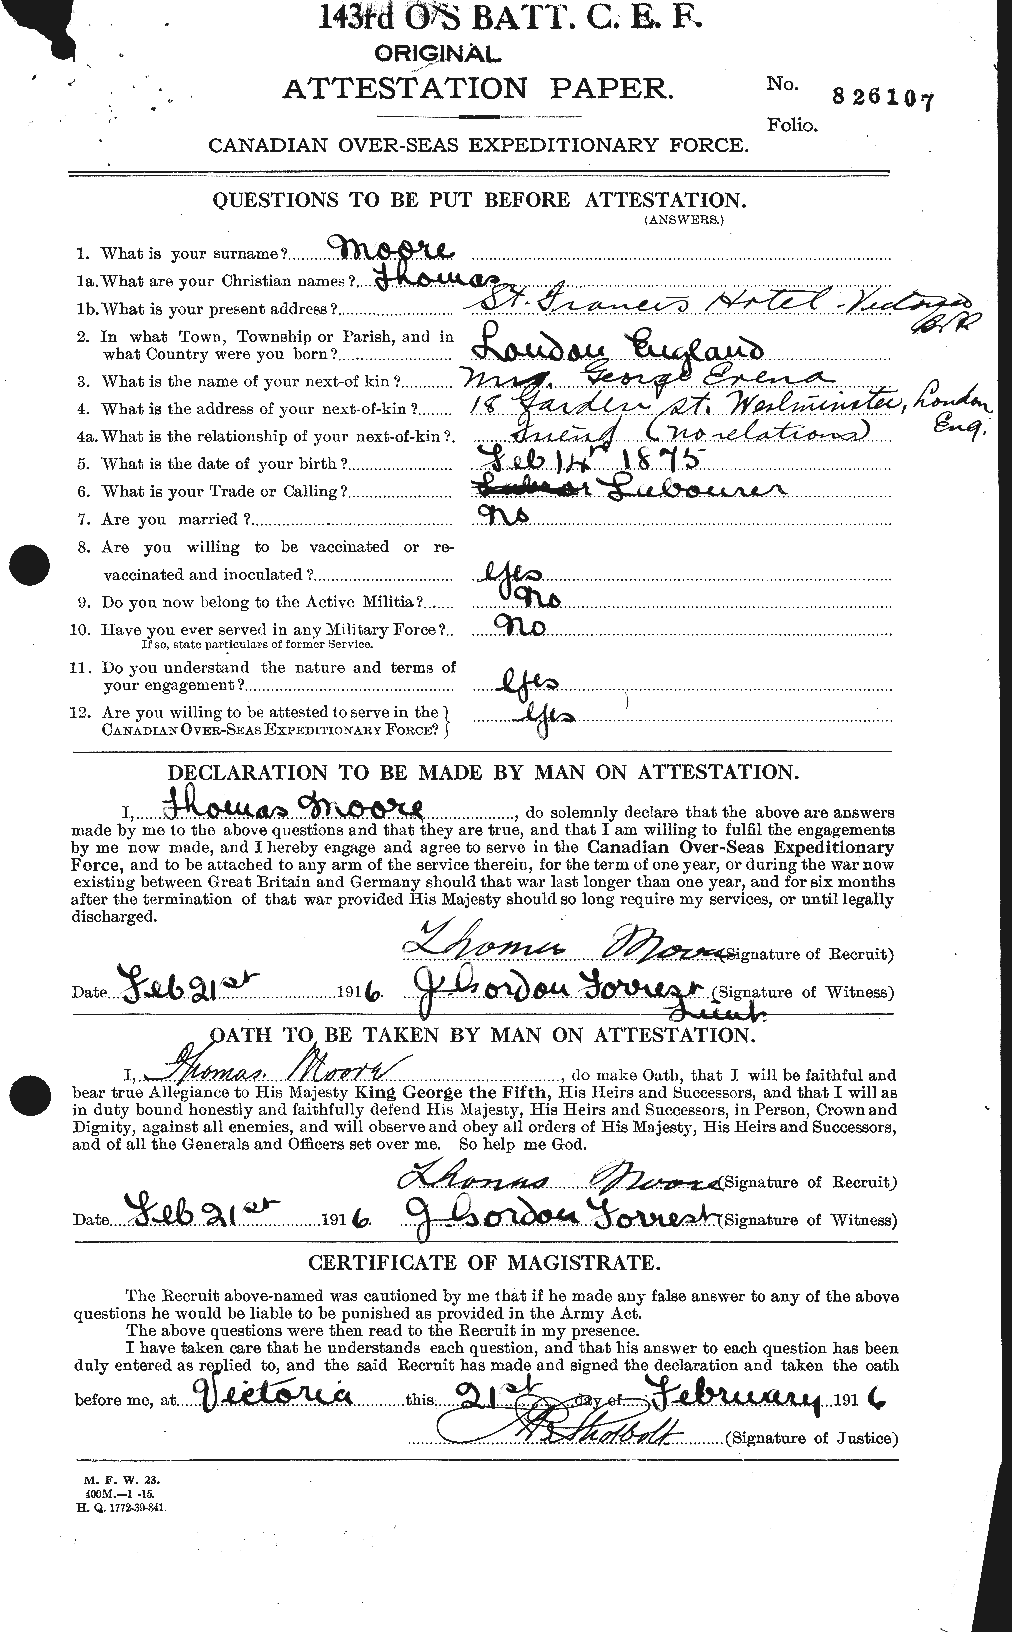 Personnel Records of the First World War - CEF 505611a